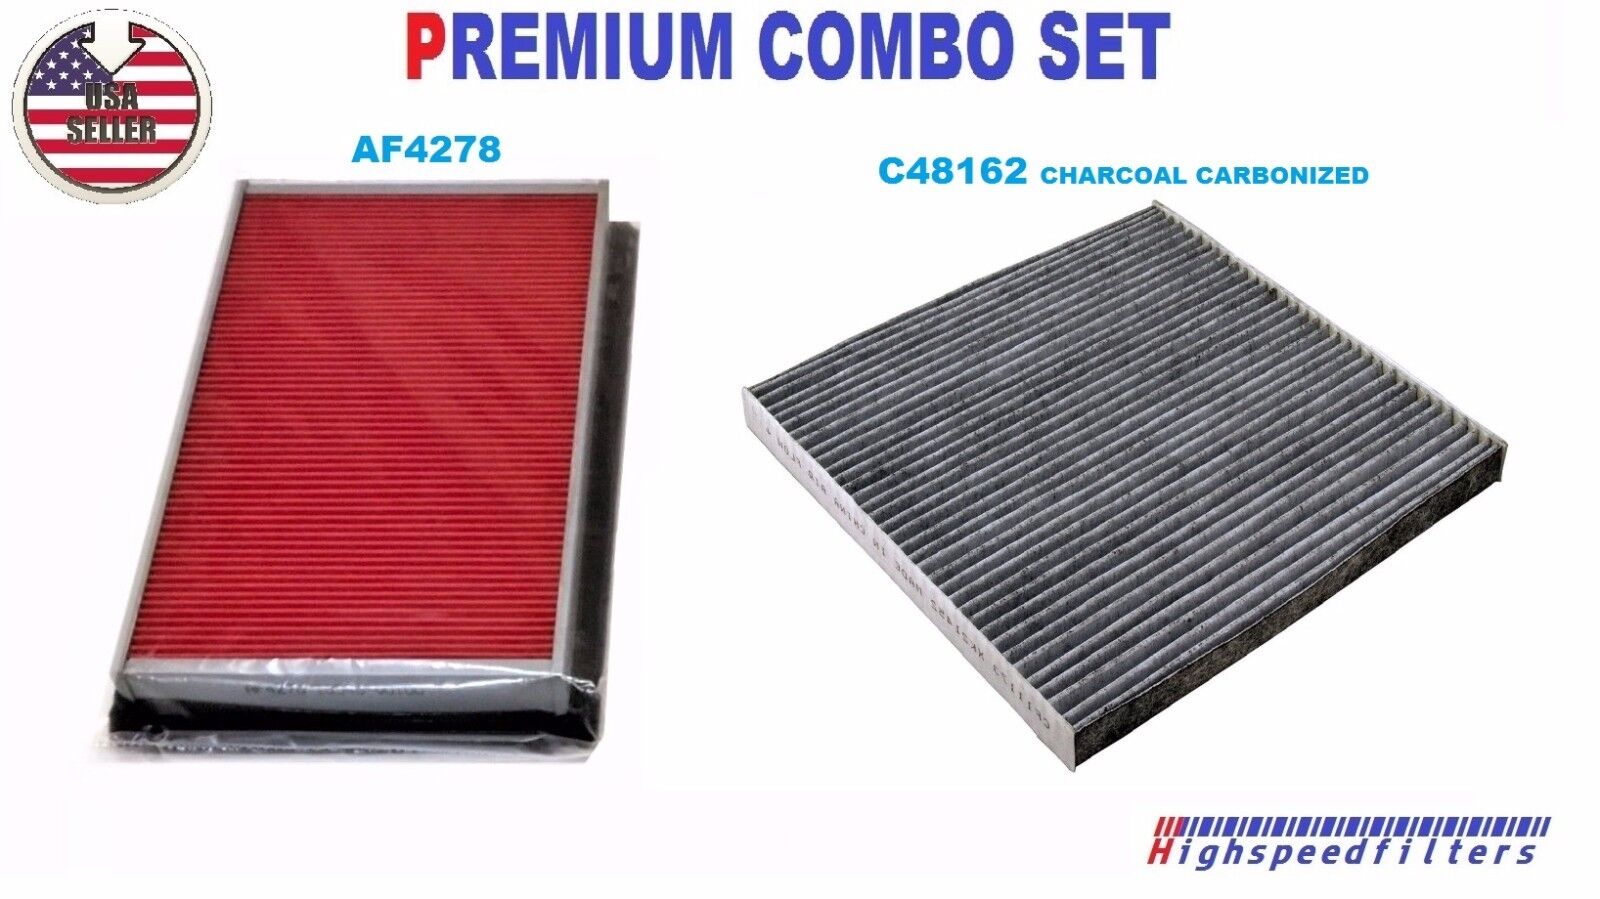 NEW Engine & CARBONIZED Cabin Air Filter for 2016 - 2021 NISSAN MAXIMA MURANO V6